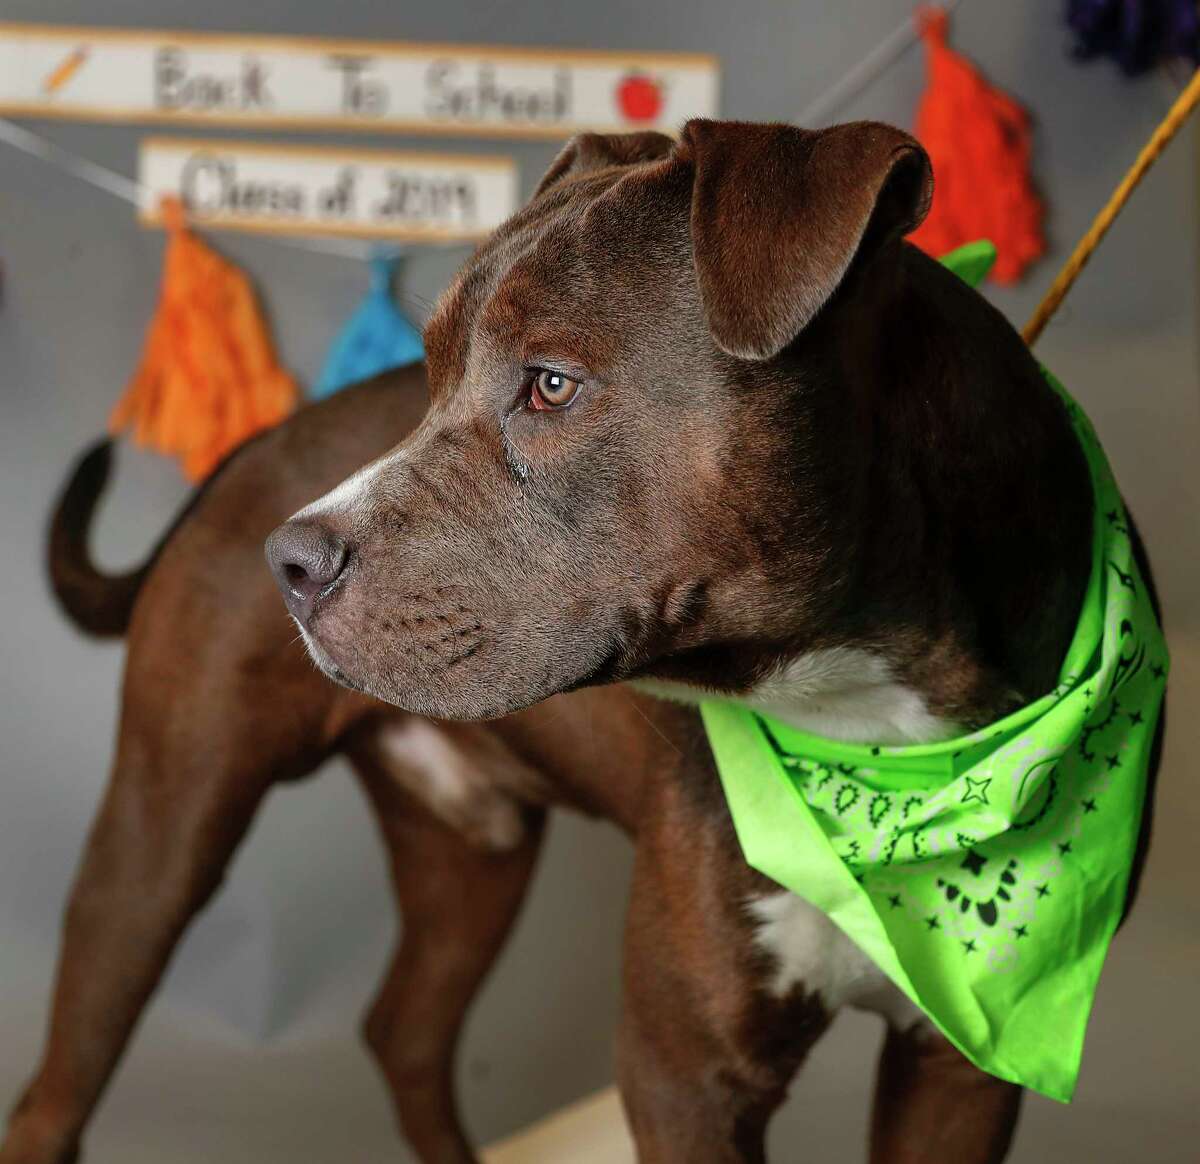 Asher is a 1-year-old, male, American Staffordshire mix available for adoption at the Harris County Animal Shelter, in Houston. (Animal ID: A539612) Photographed Tuesday, August 20, 2019. Asher is a very handsome boy, who loves treats and toys.